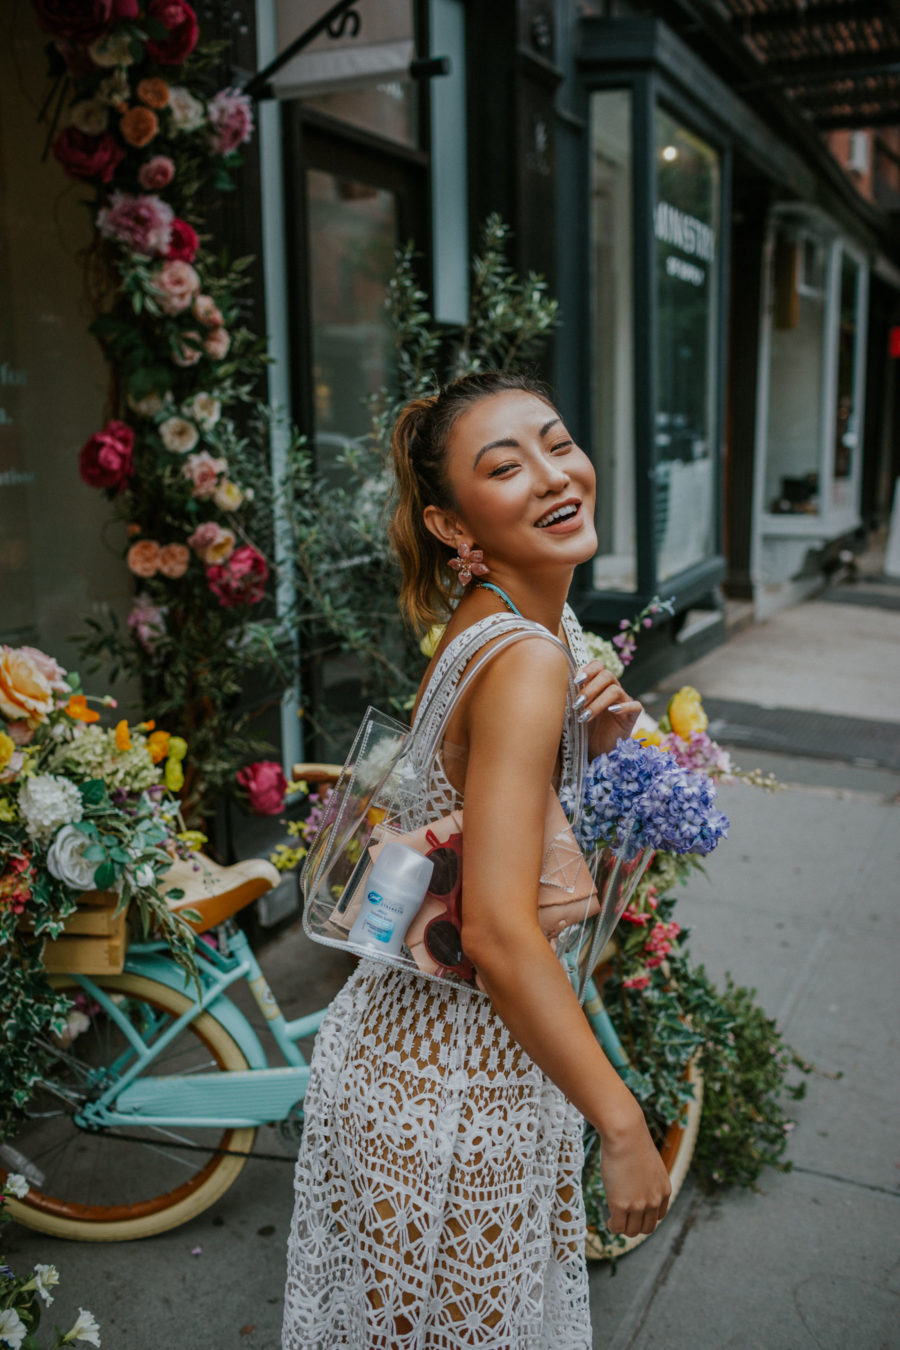 My Best Tips for Feeling Confident with Secret Invisible Shield Deodorant // White Lace Dress, Transparent Tote, Clear Handbag, Summer Style, Top NYC Blogger // Notjessfashion.com